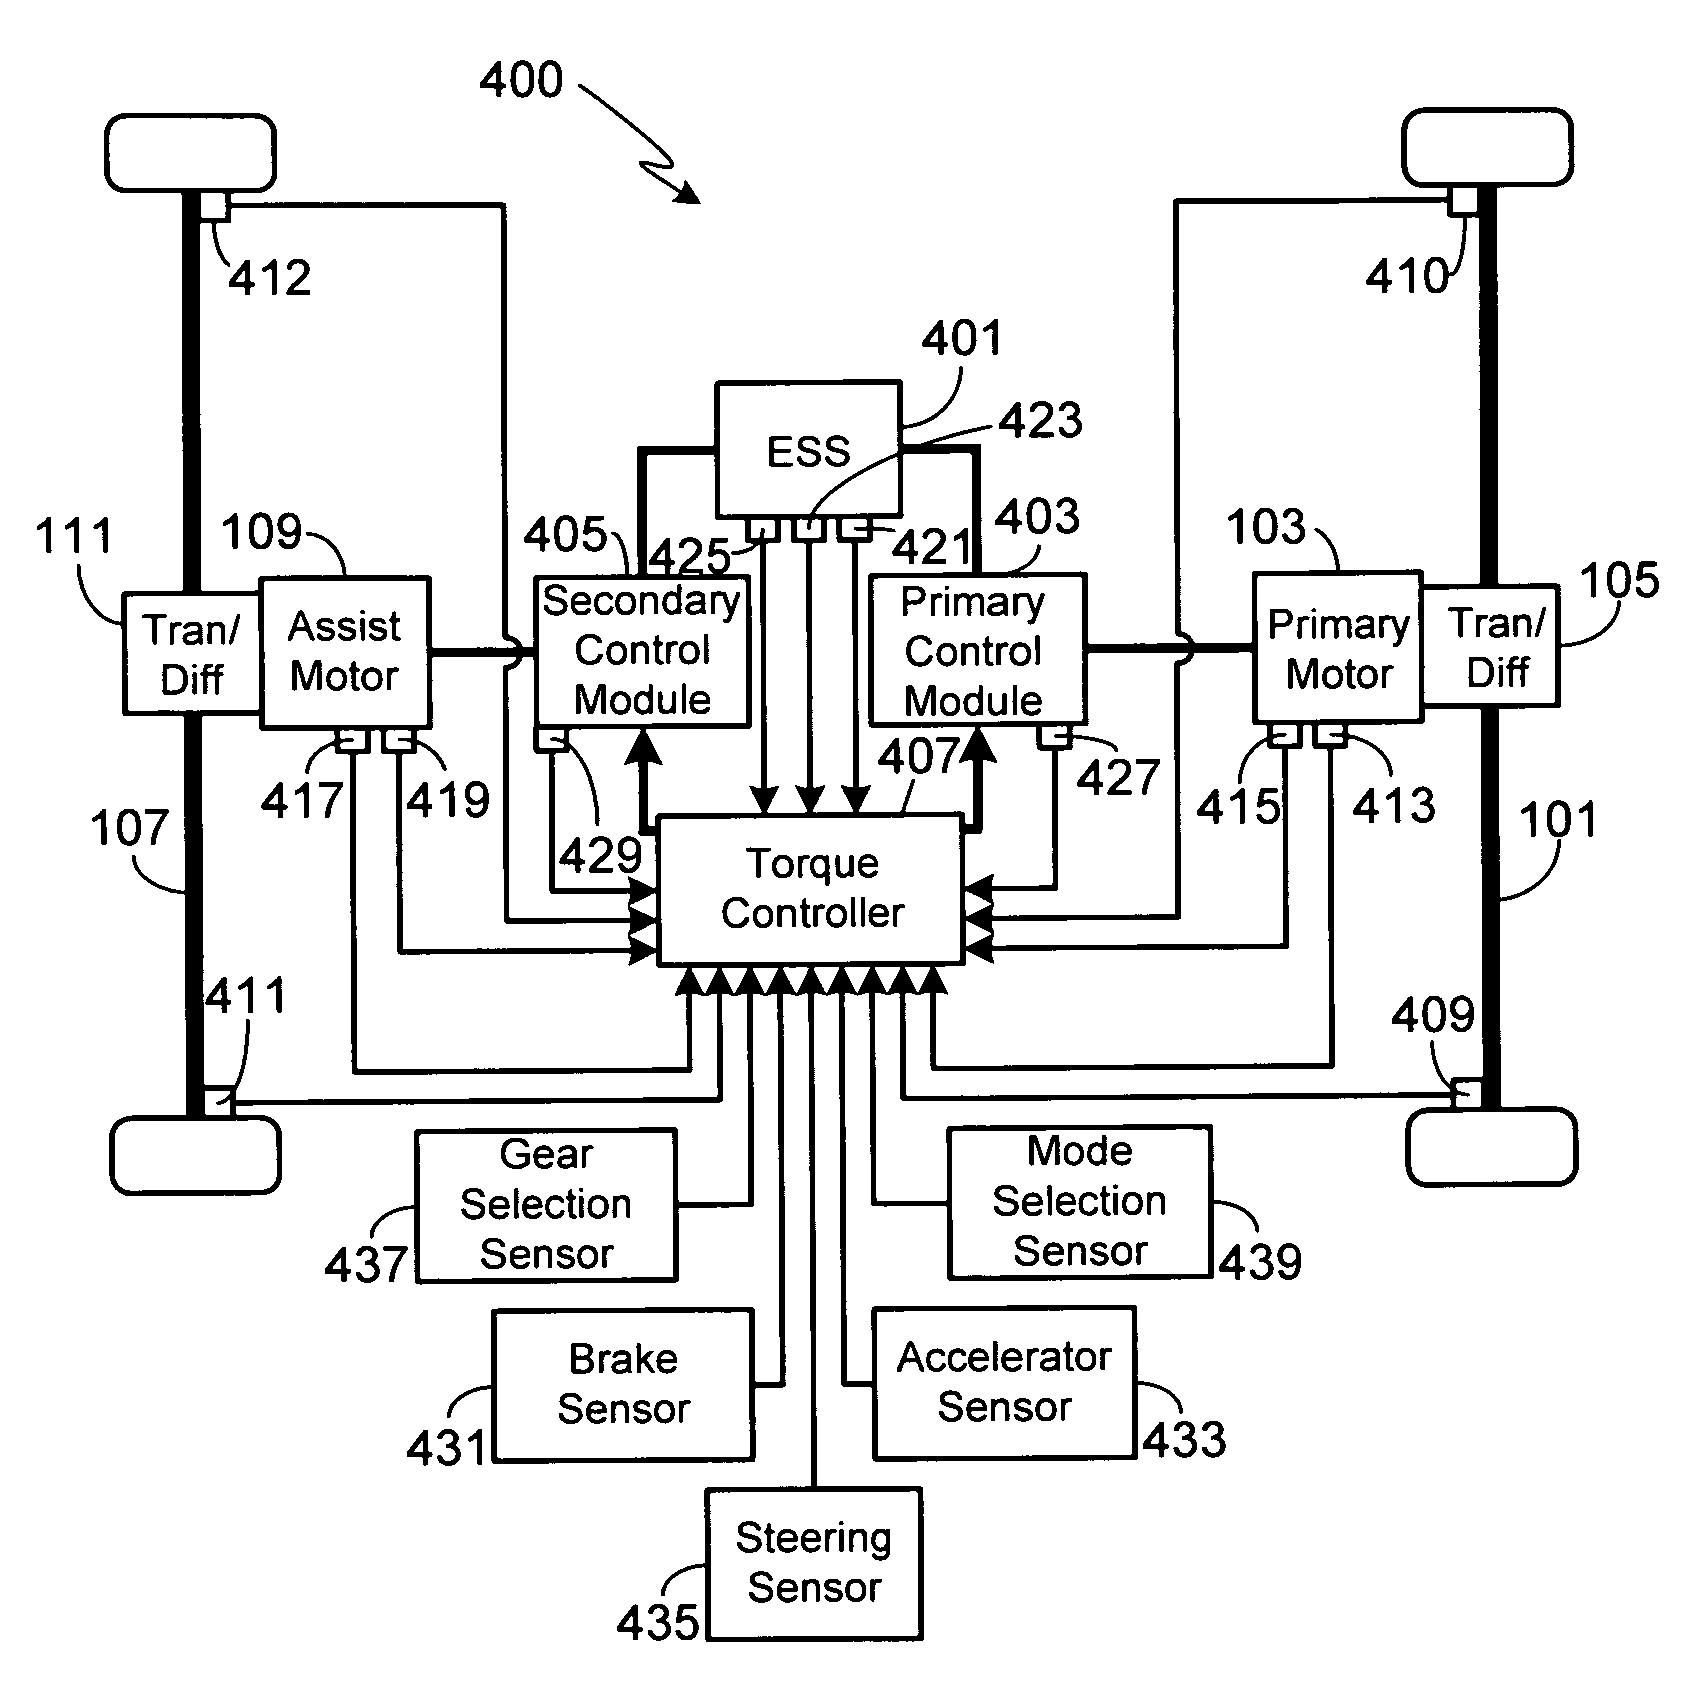 Control system for an all-wheel drive electric vehicle